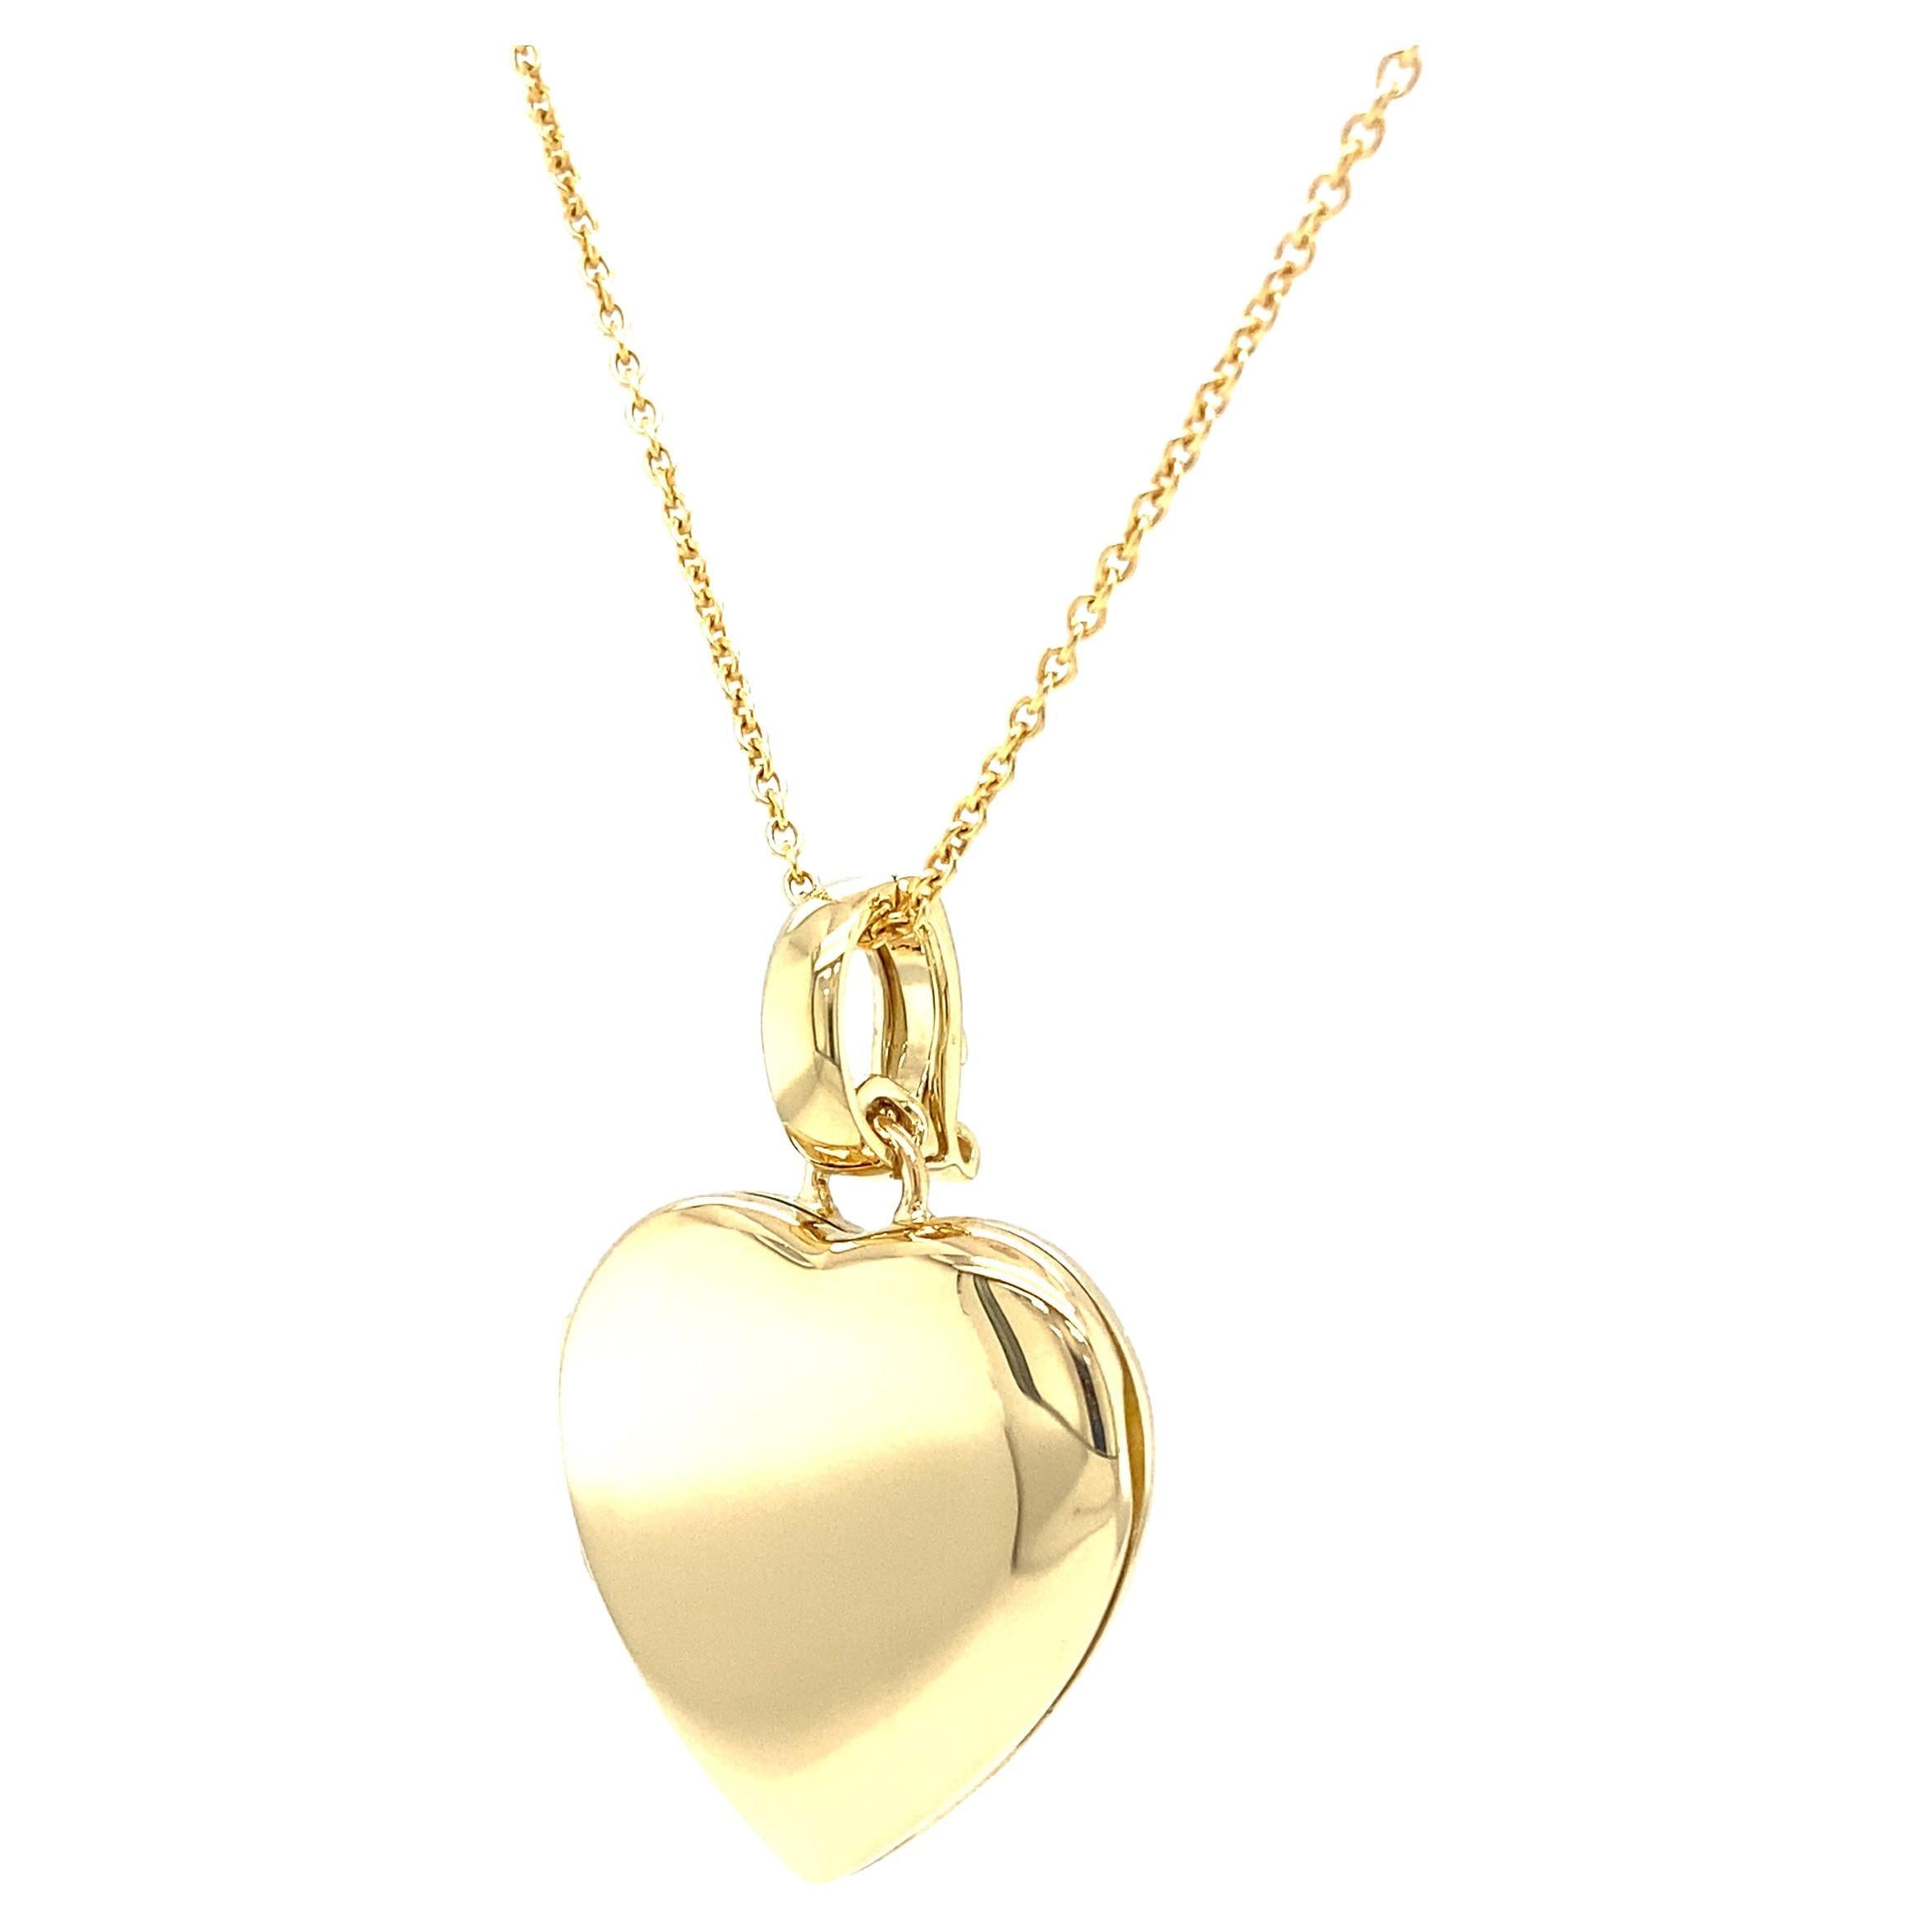 Heart Locket Pendant Necklace - 18k Yellow Gold - robust design - 23 x 25 mm For Sale